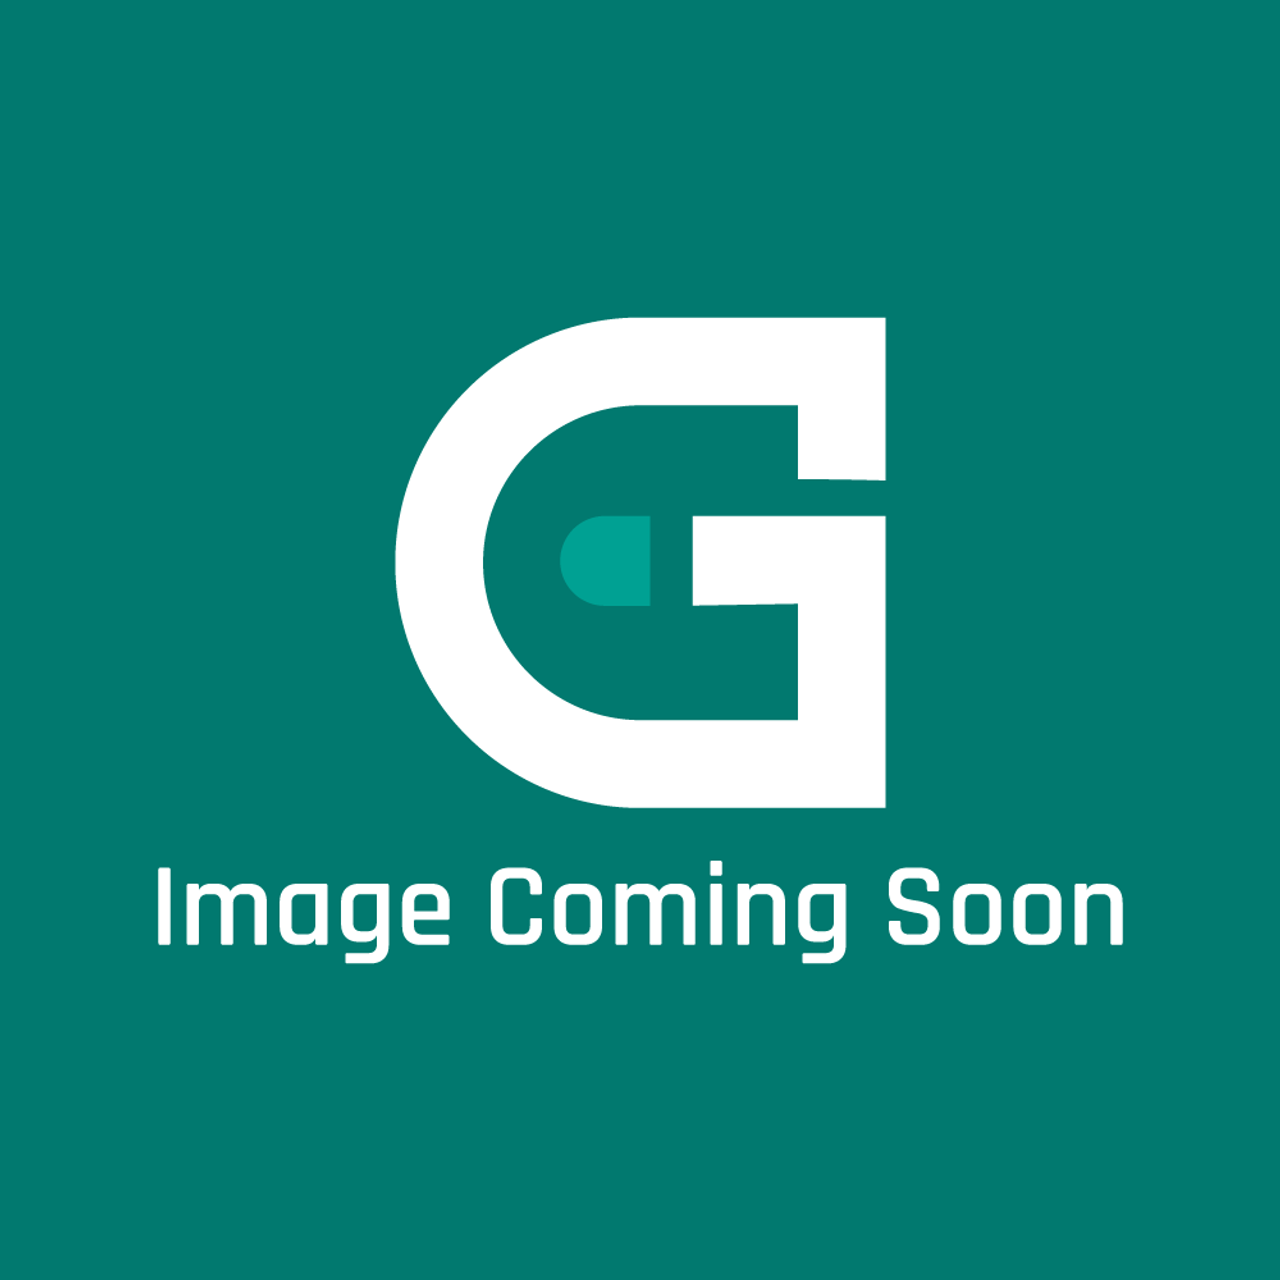 Frigidaire - Electrolux 5304512906 Dw Inst Kit 90D Cor - Image Coming Soon!